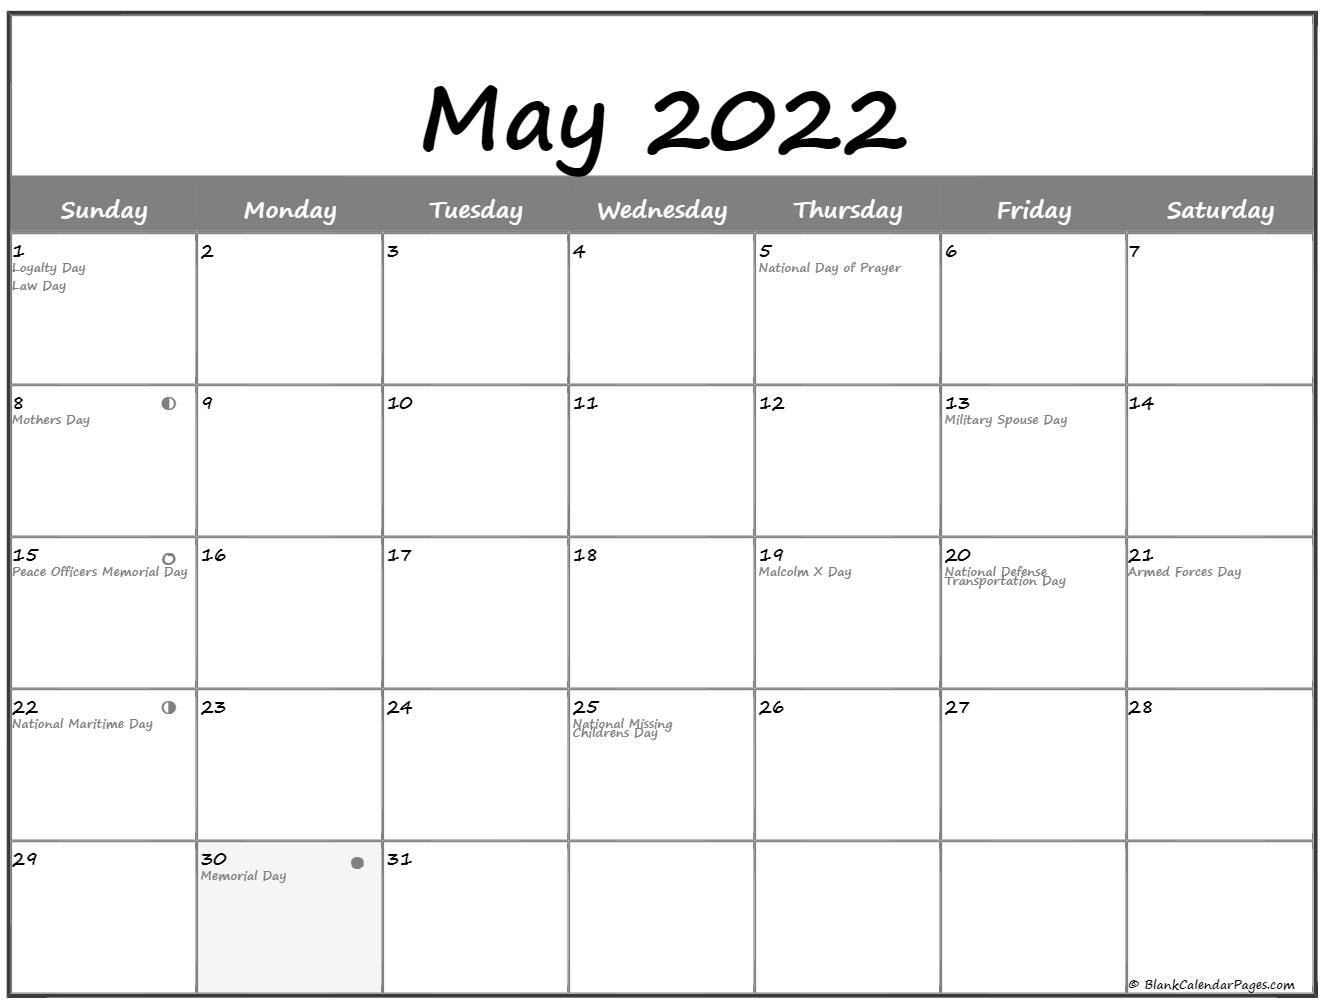 Catch Calendar For May 2022 With Holidays